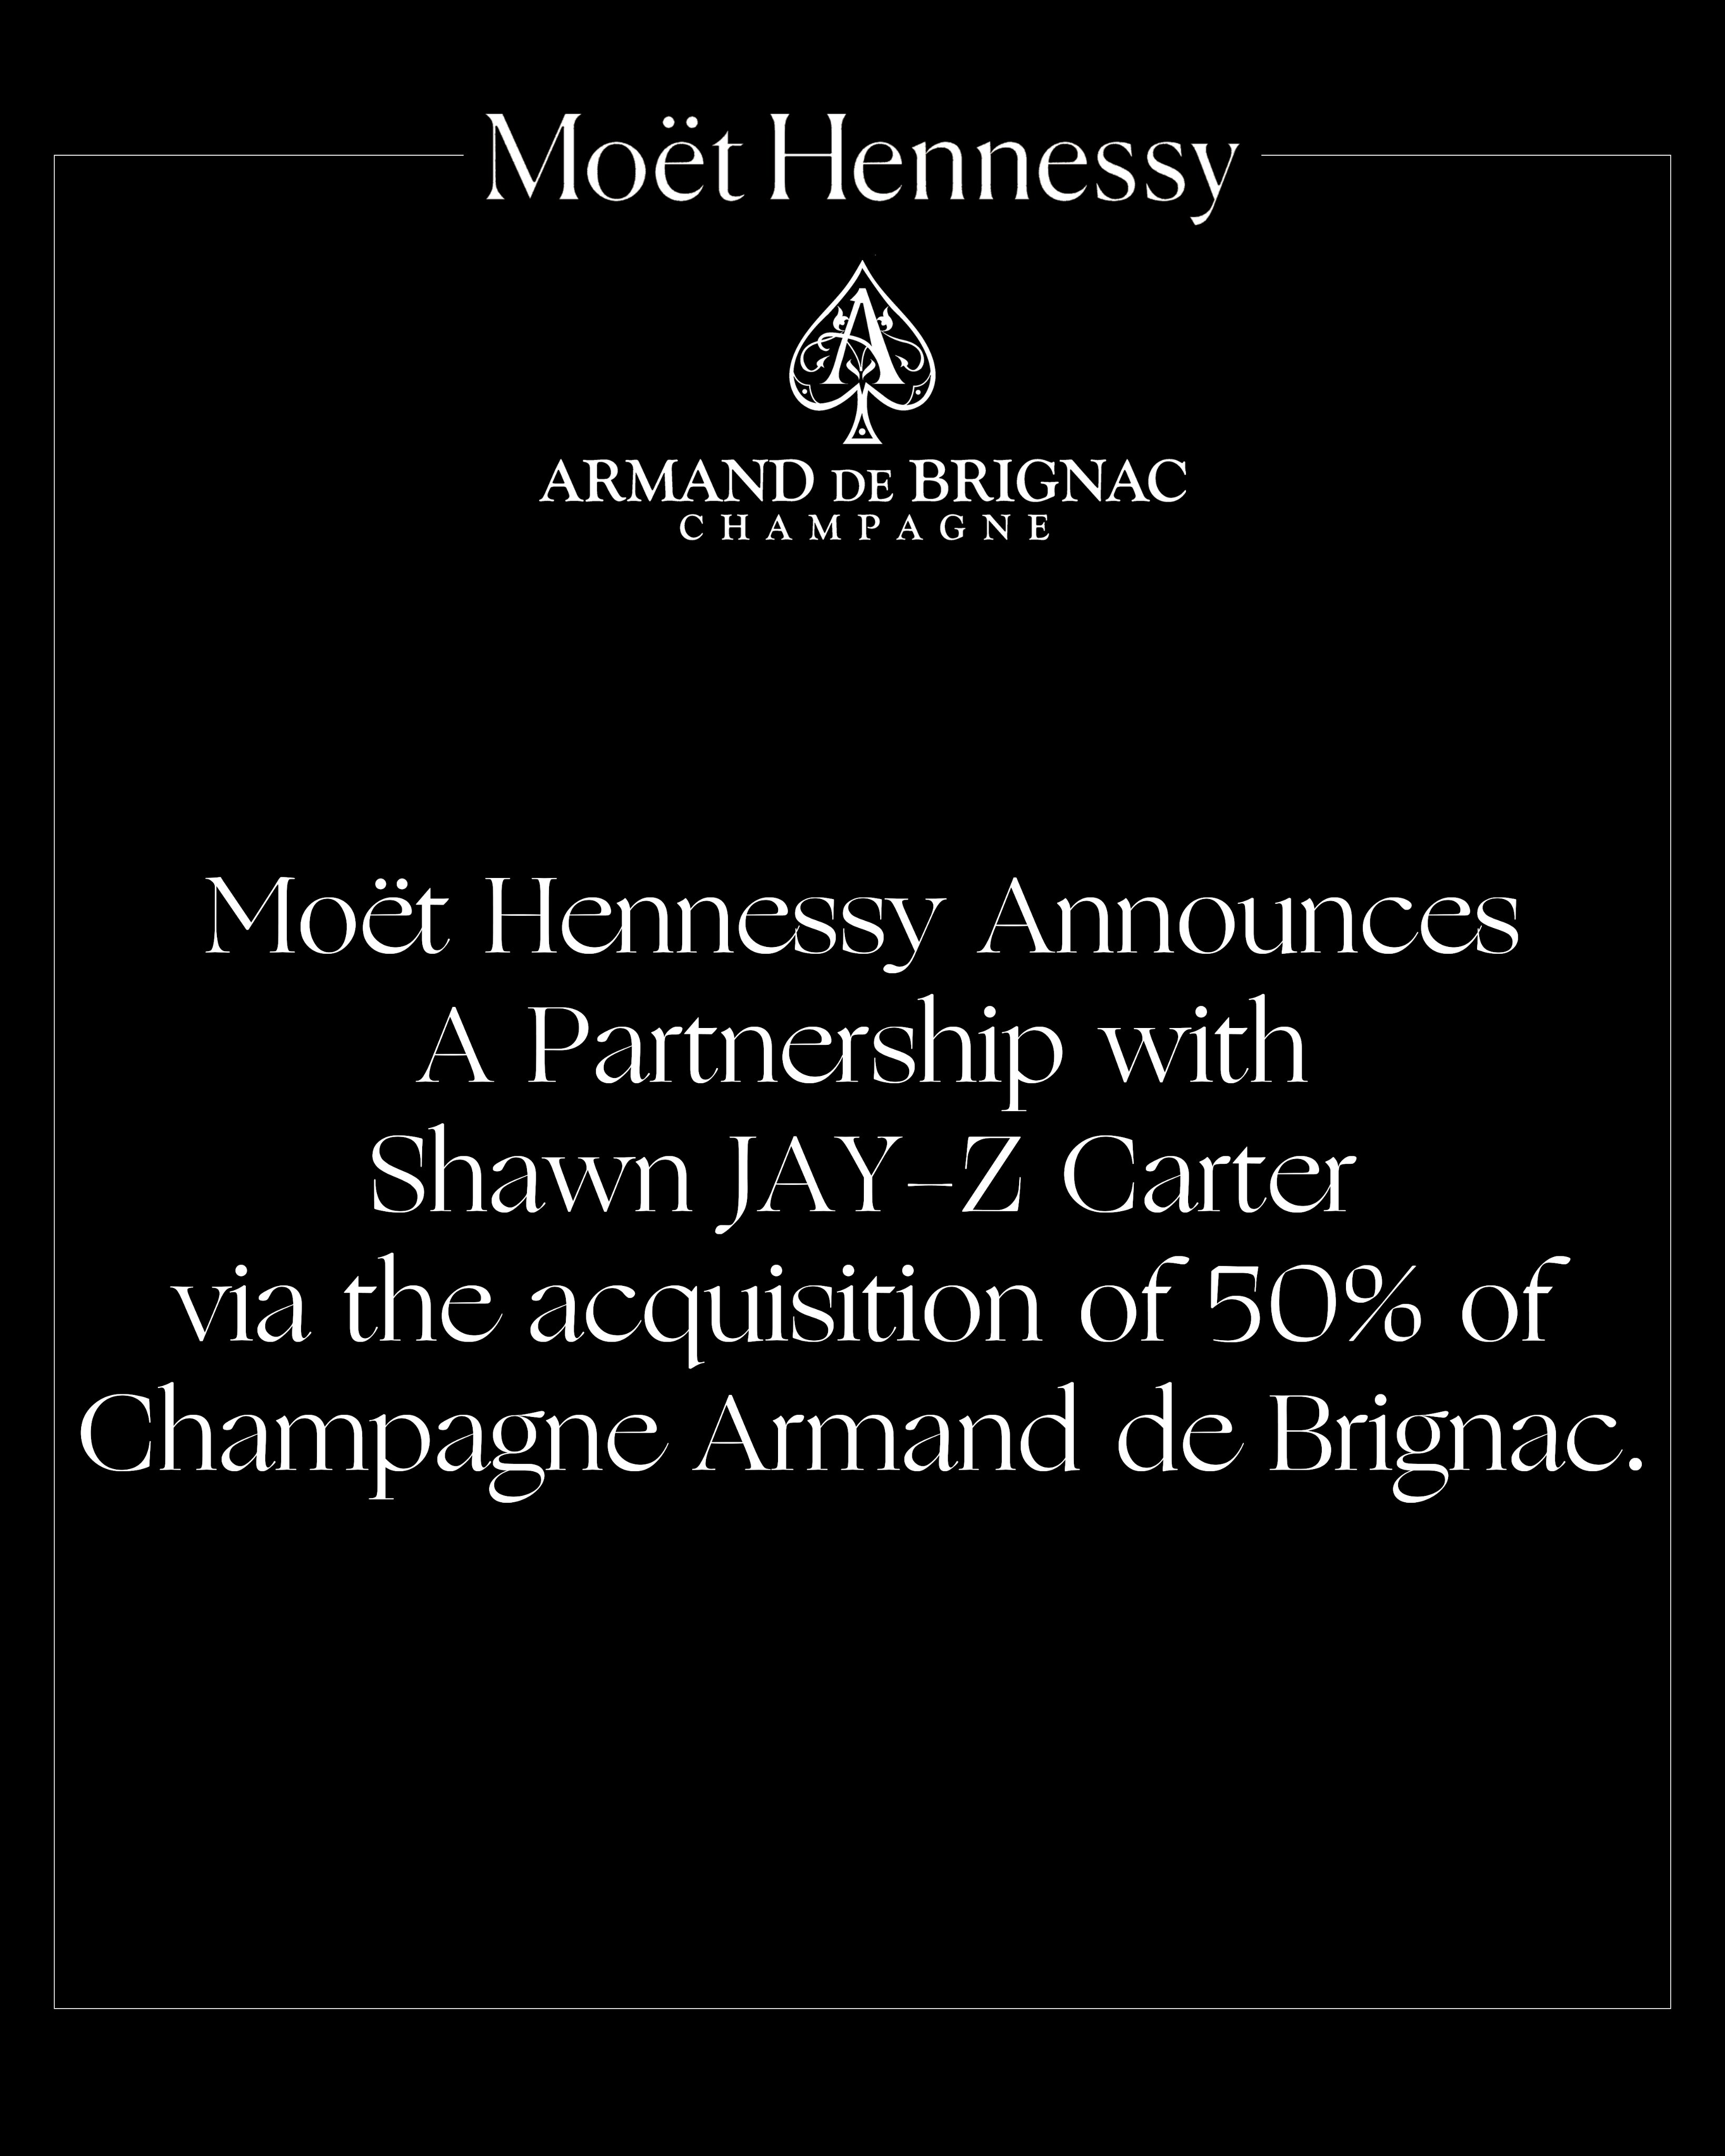 Armand de Brignac on X: Shawn JAY-Z Carter is pleased to announce a  partnership with Moët Hennessy as they acquire a 50% stake in Armand de  Brignac. The partnership reflects a shared